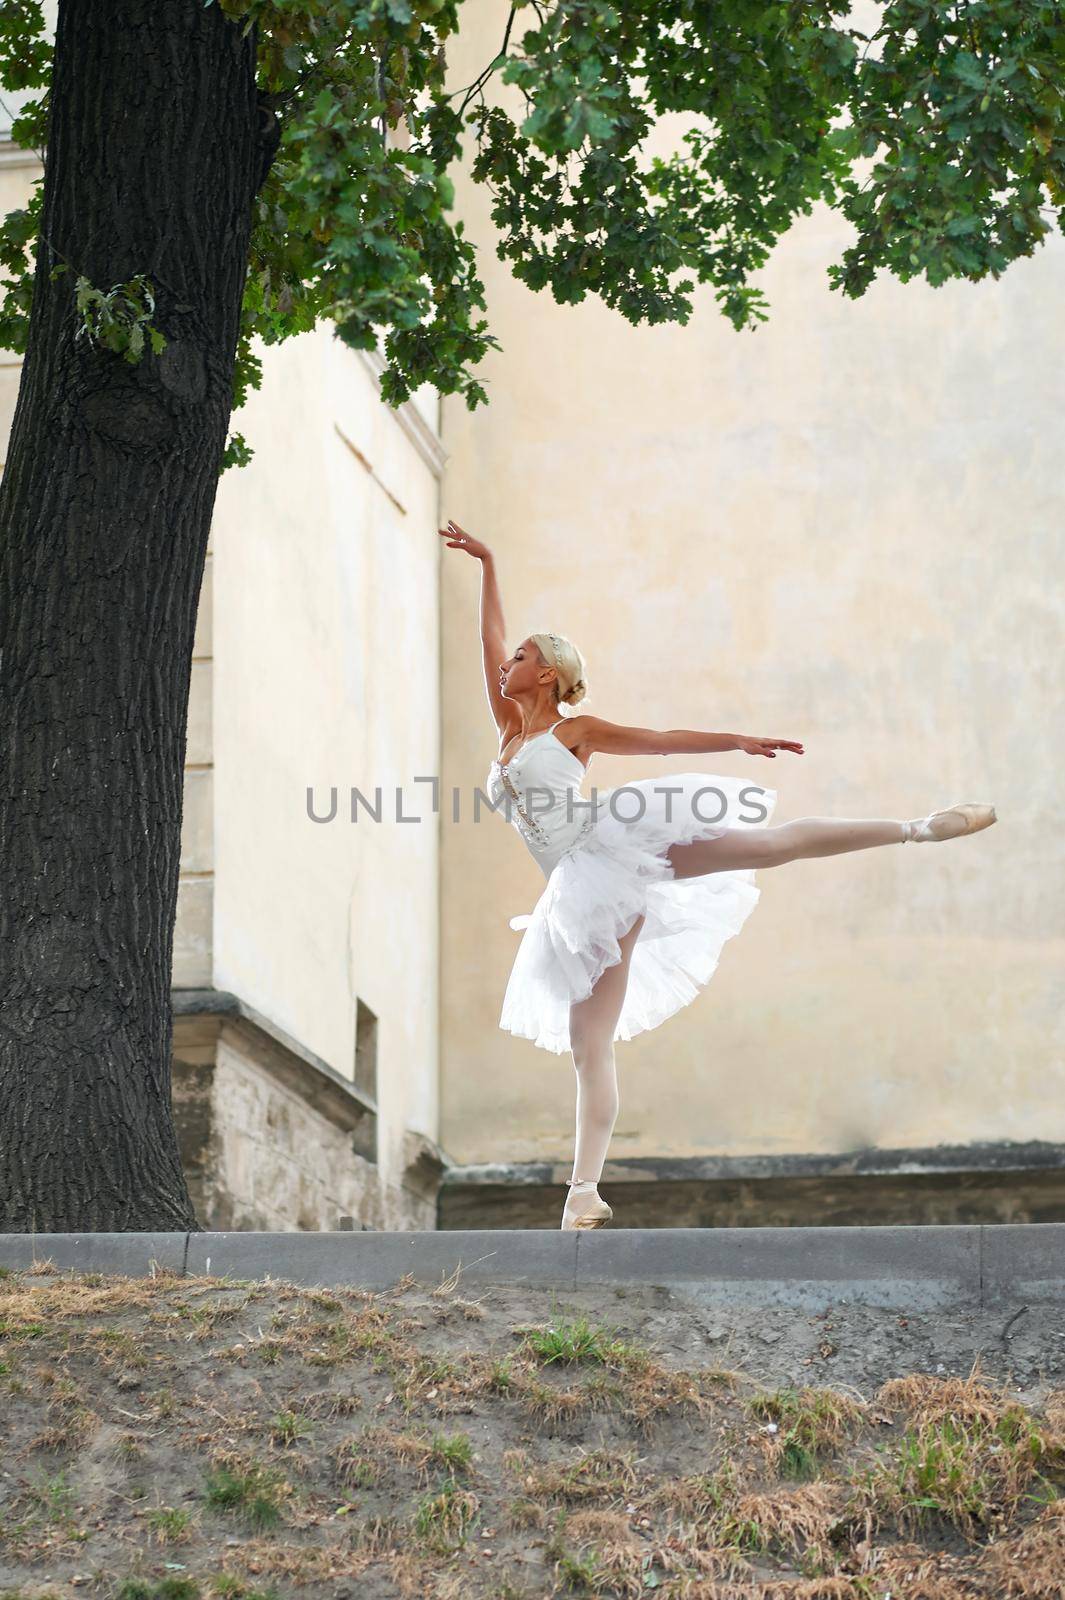 Beautiful graceful ballerina dancing on the streets of an old ci by SerhiiBobyk